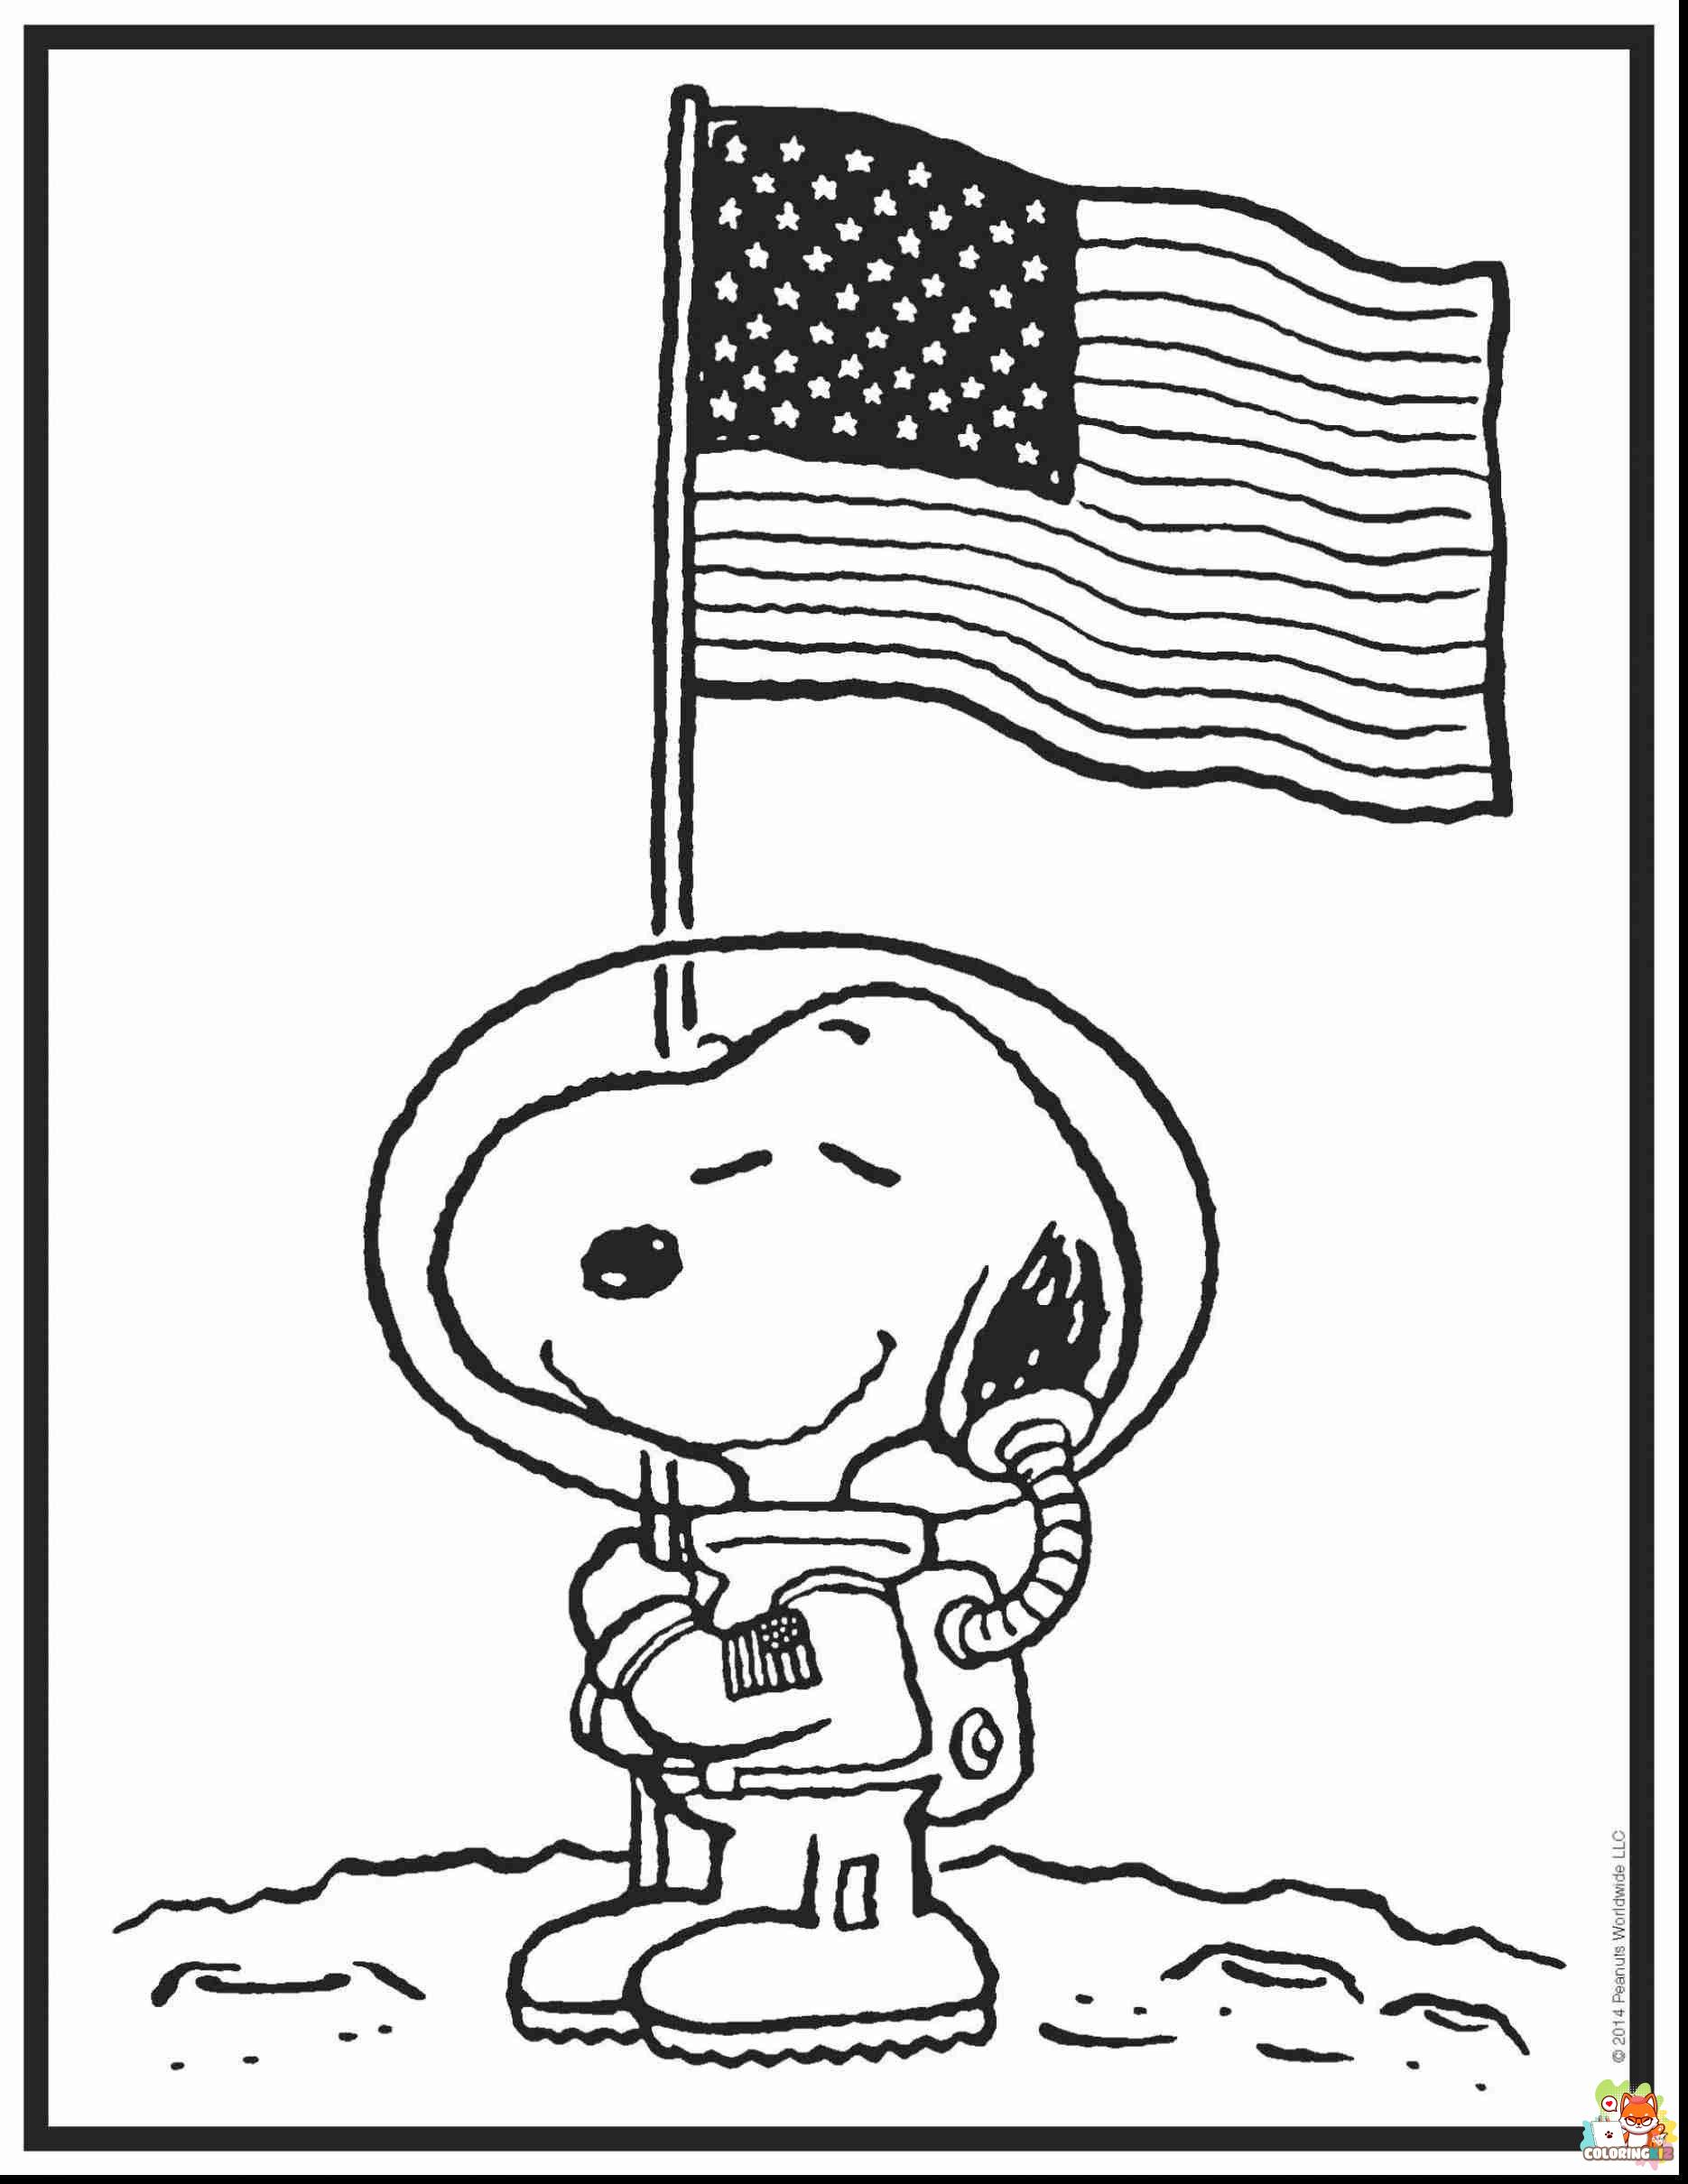 Snoopy Coolest Style Coloring Pages 2